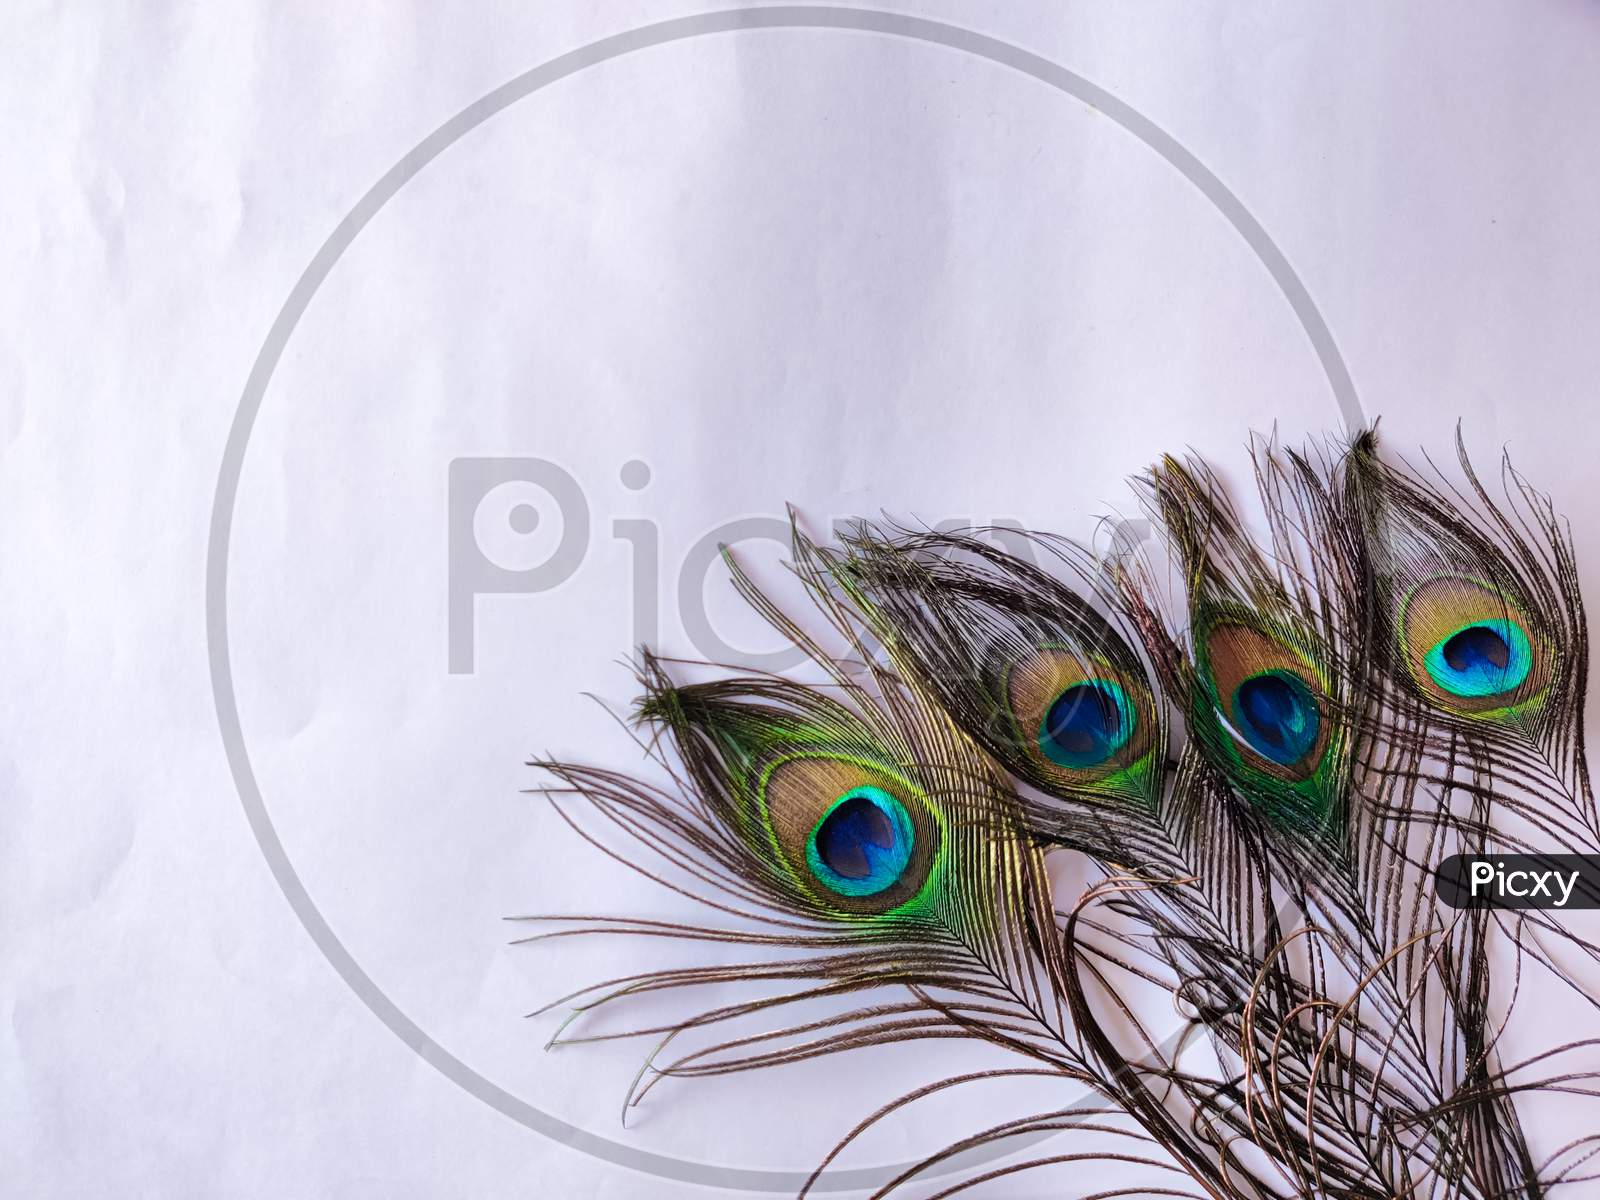 Four Set Of Peacock Feathers Isolated On White Background. Copy Space